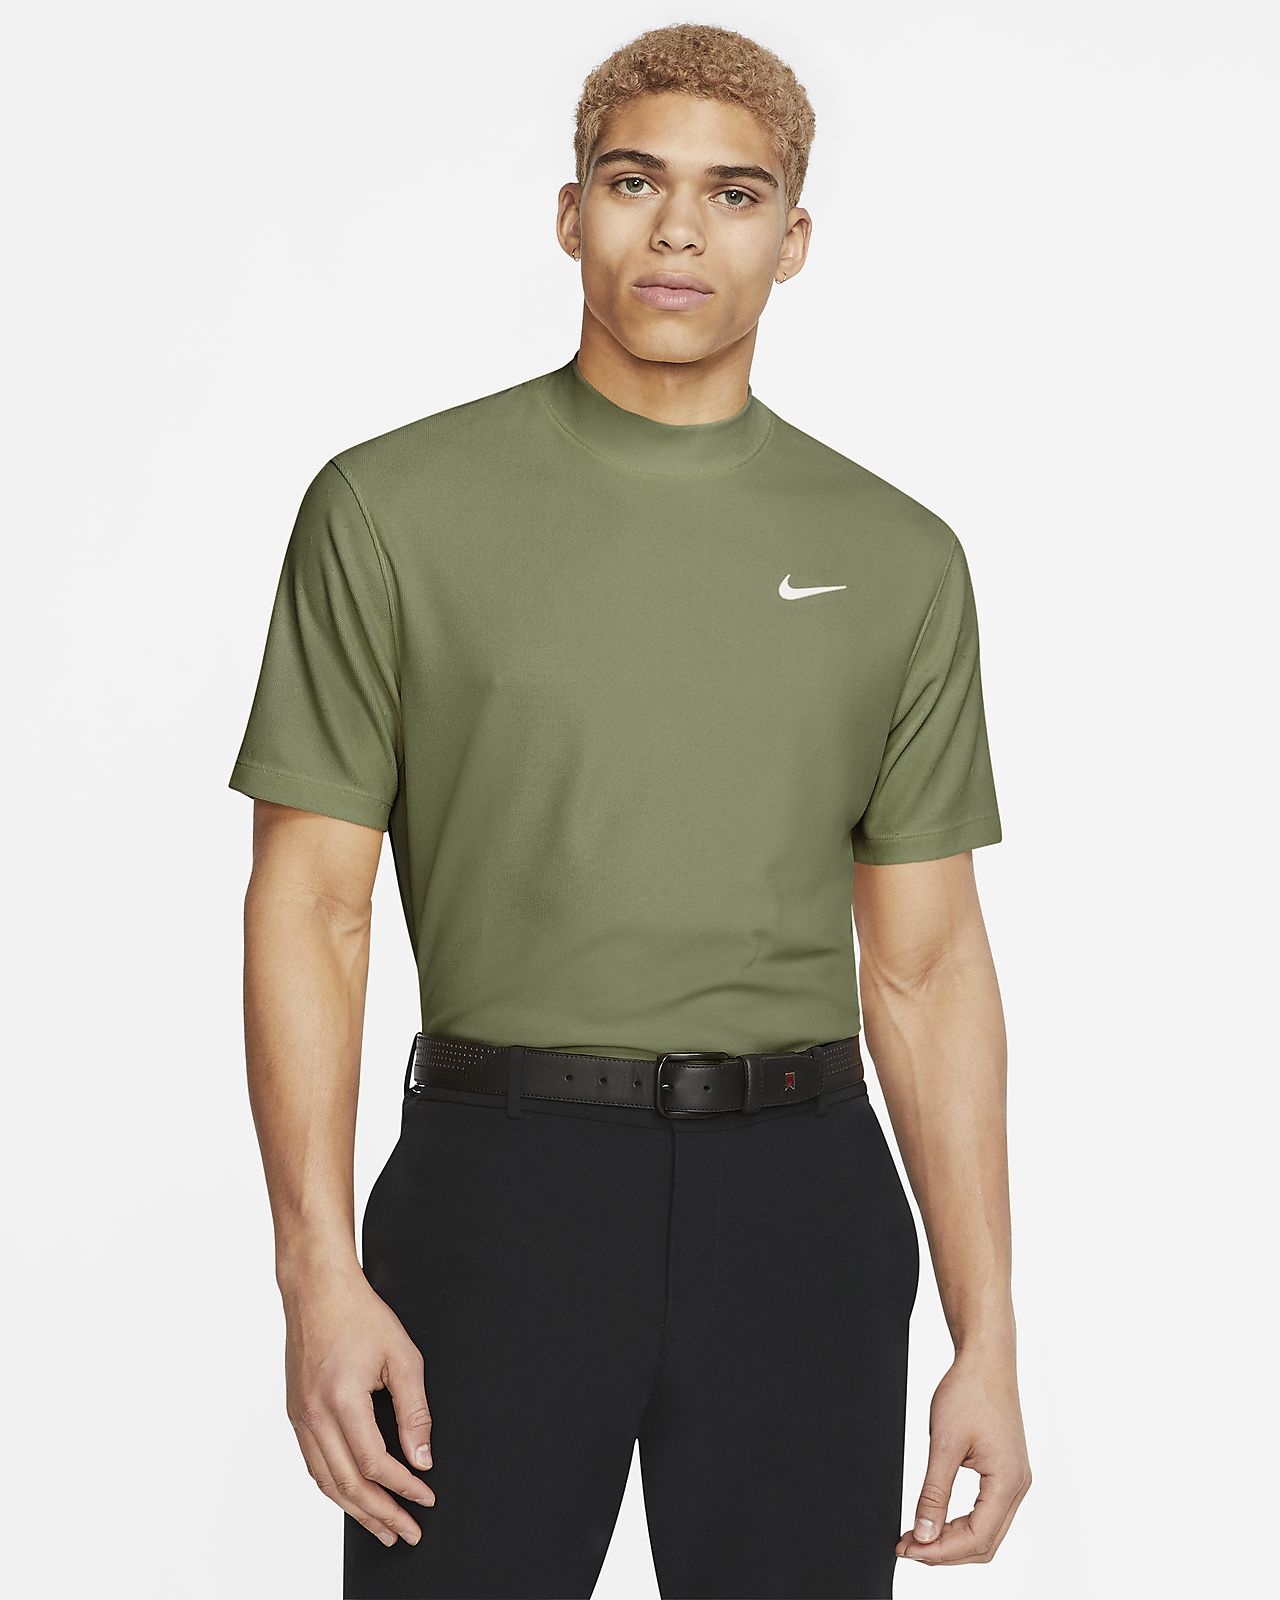 tiger woods nike shirt if anyone can